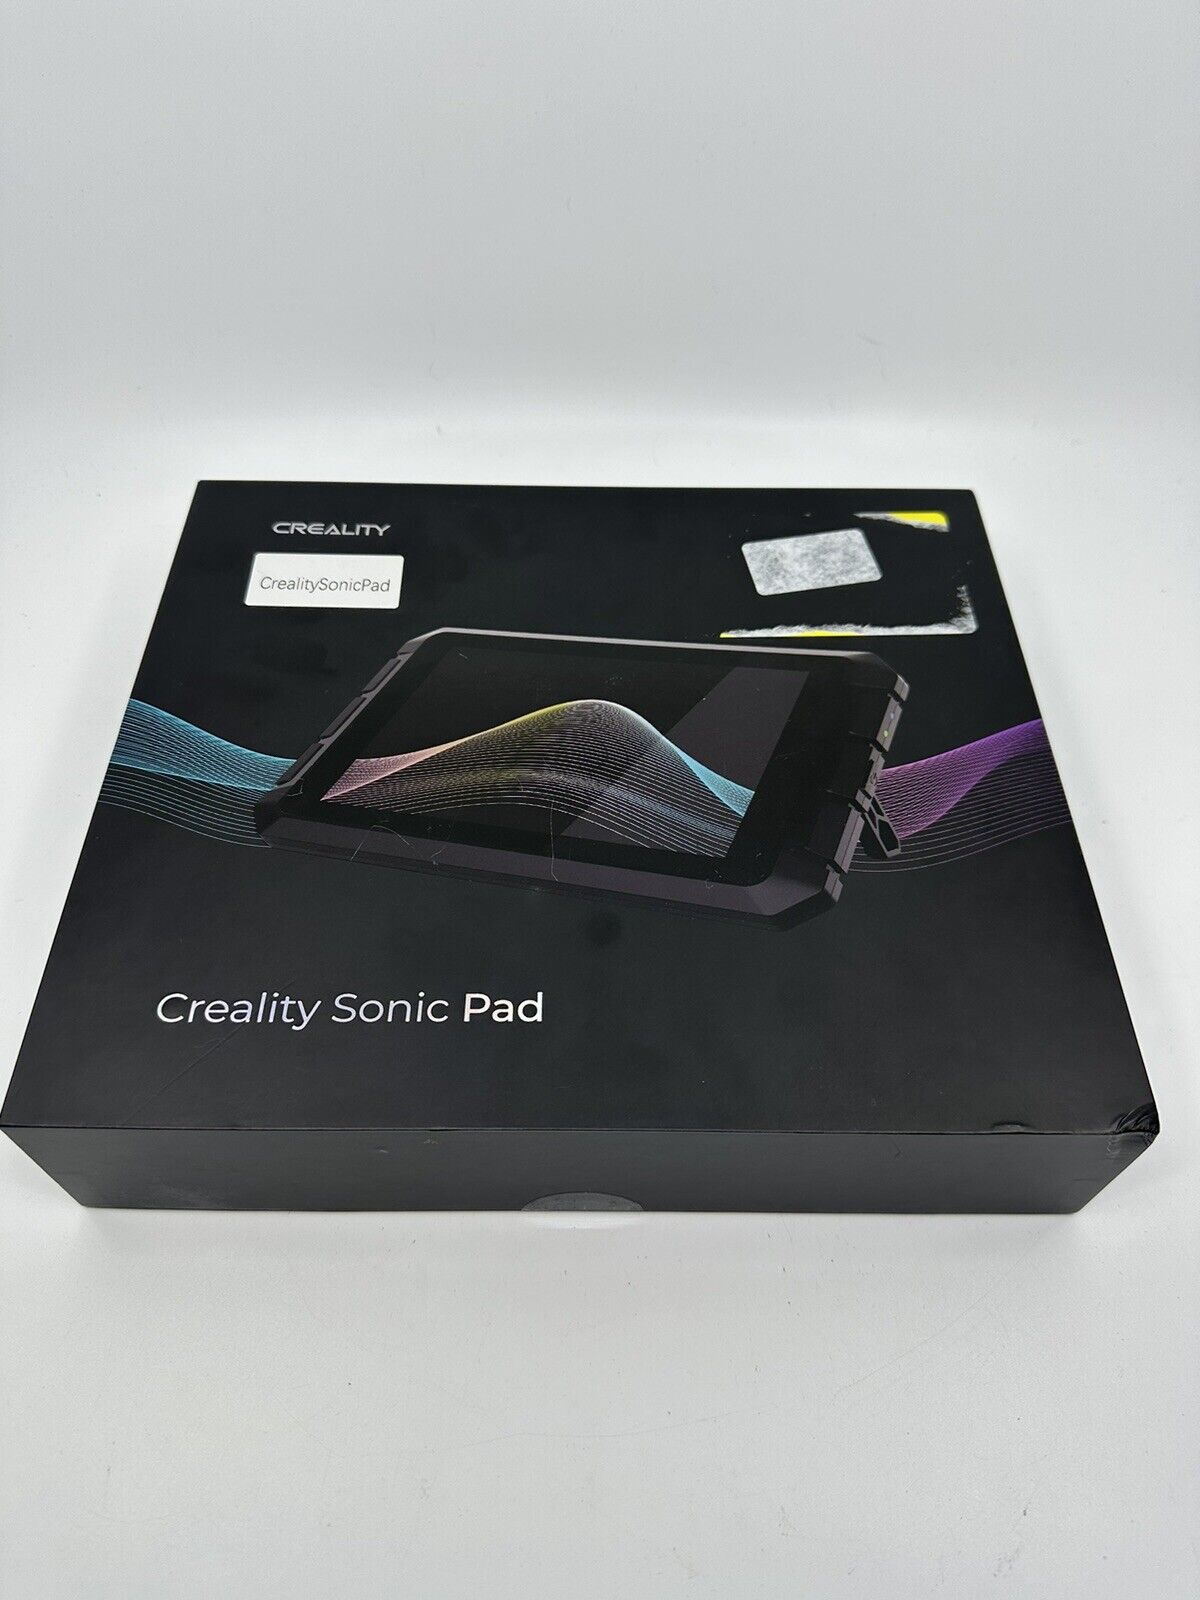 [open box] Creality Sonic Pad Multi Touch Screen For 3D Printer